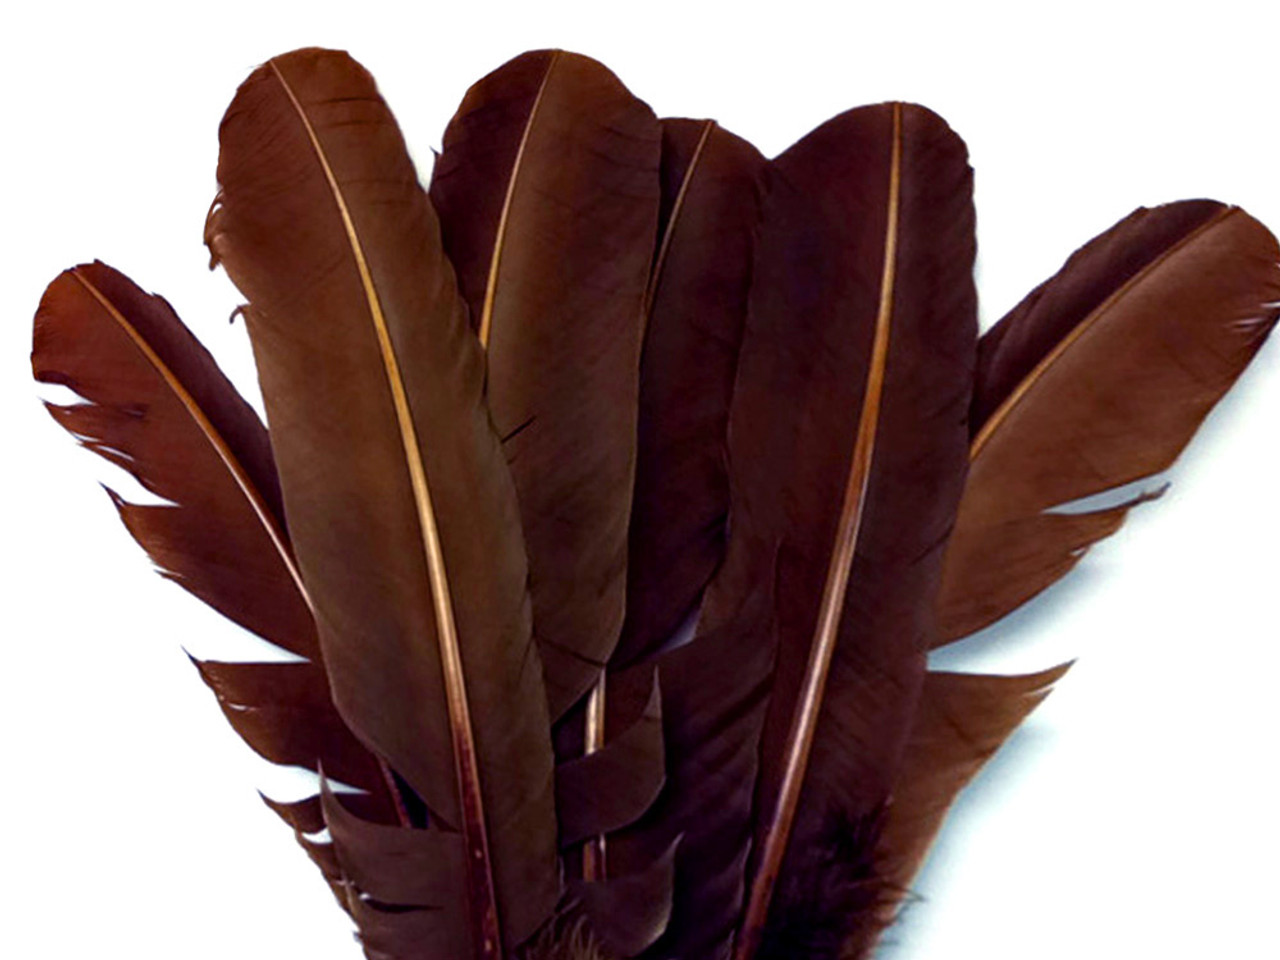 11 Color 10-12 inch Turkey Quill Feathers 20 pcs, Primary Wing Quill Large  Feathers Left Side Craft Costume, Wholesale Feather Supplier (Dark Brown